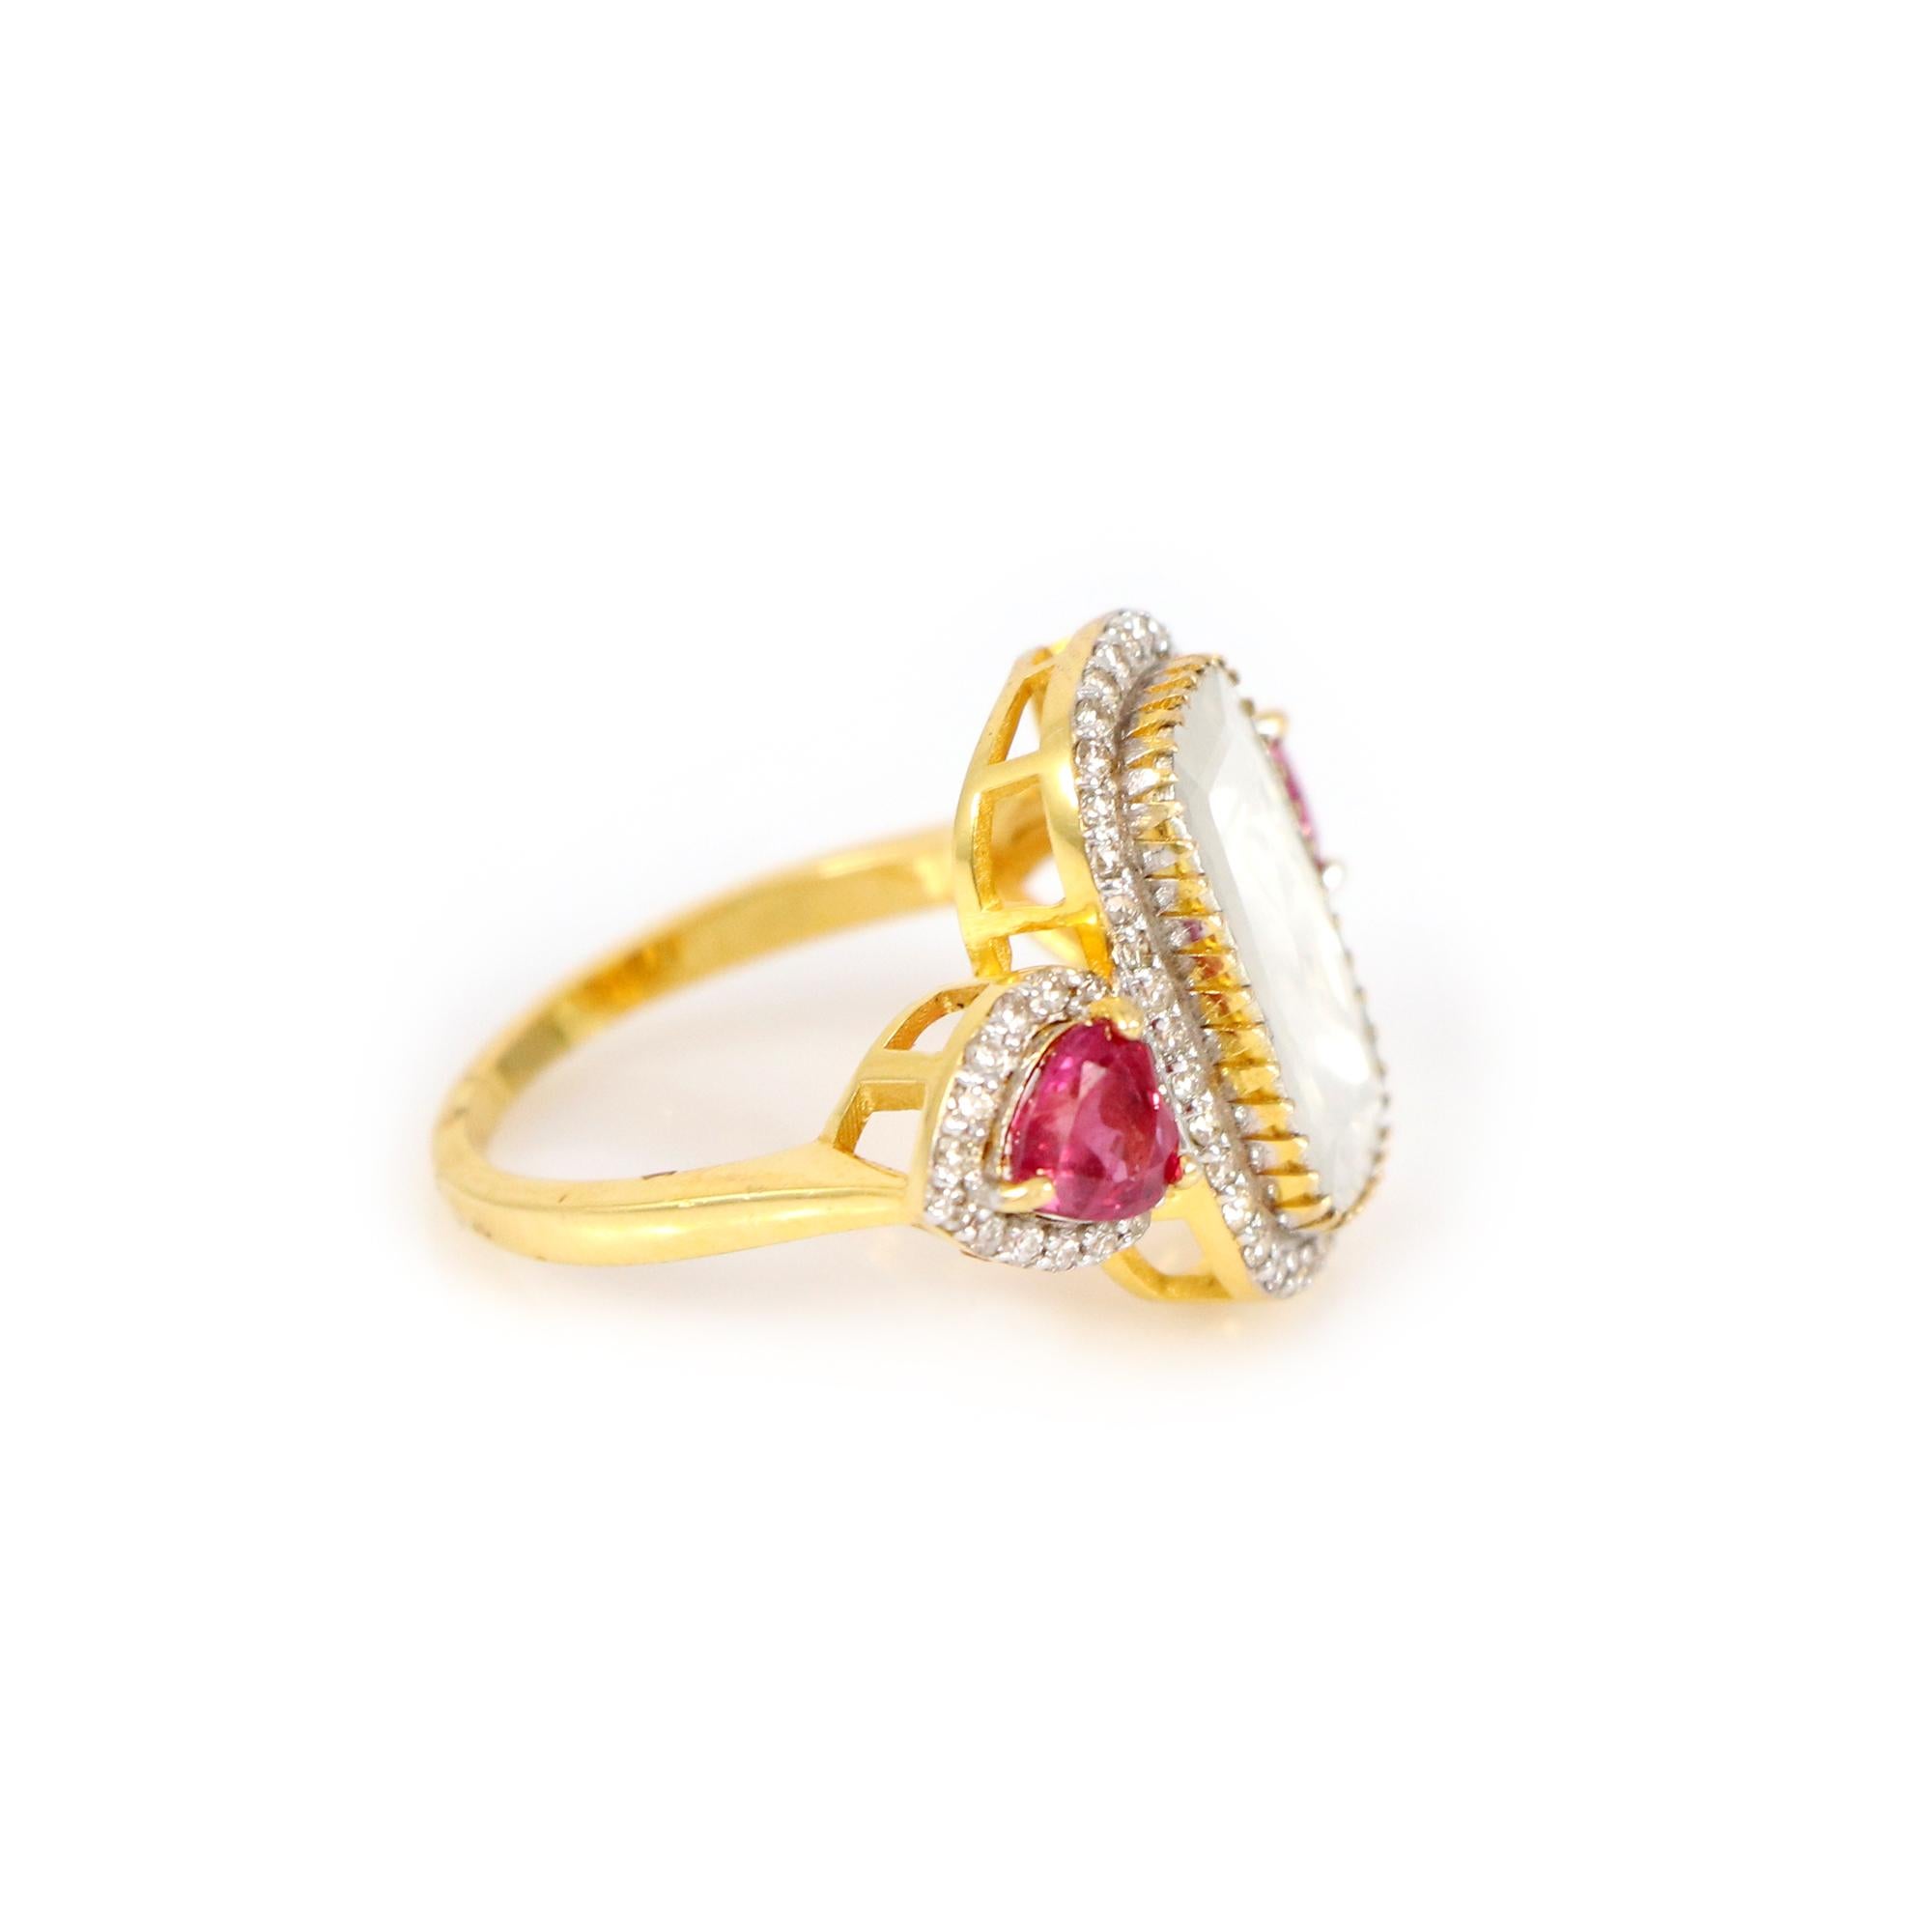 Discover a world of timeless beauty through our classic 18K yellow gold ring, a true masterpiece bedecked with rose cut diamonds, brilliant diamonds, and a heart-shaped ruby. This charming heart-shaped ruby symbolizes love, adding a profound depth